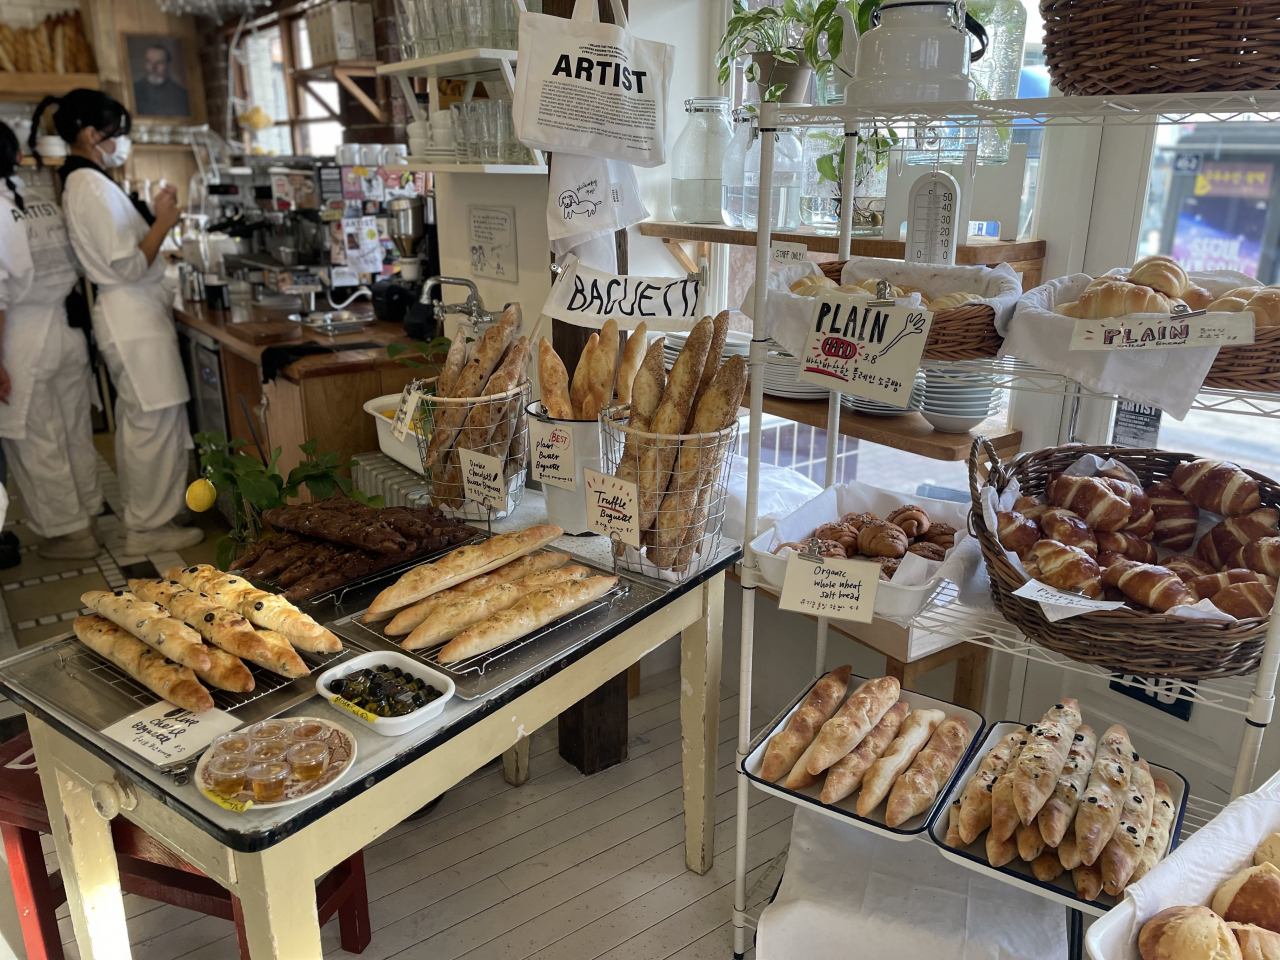 The baguette section at Artist Bakery (Kim Da-sol/Ther Korea Herald)